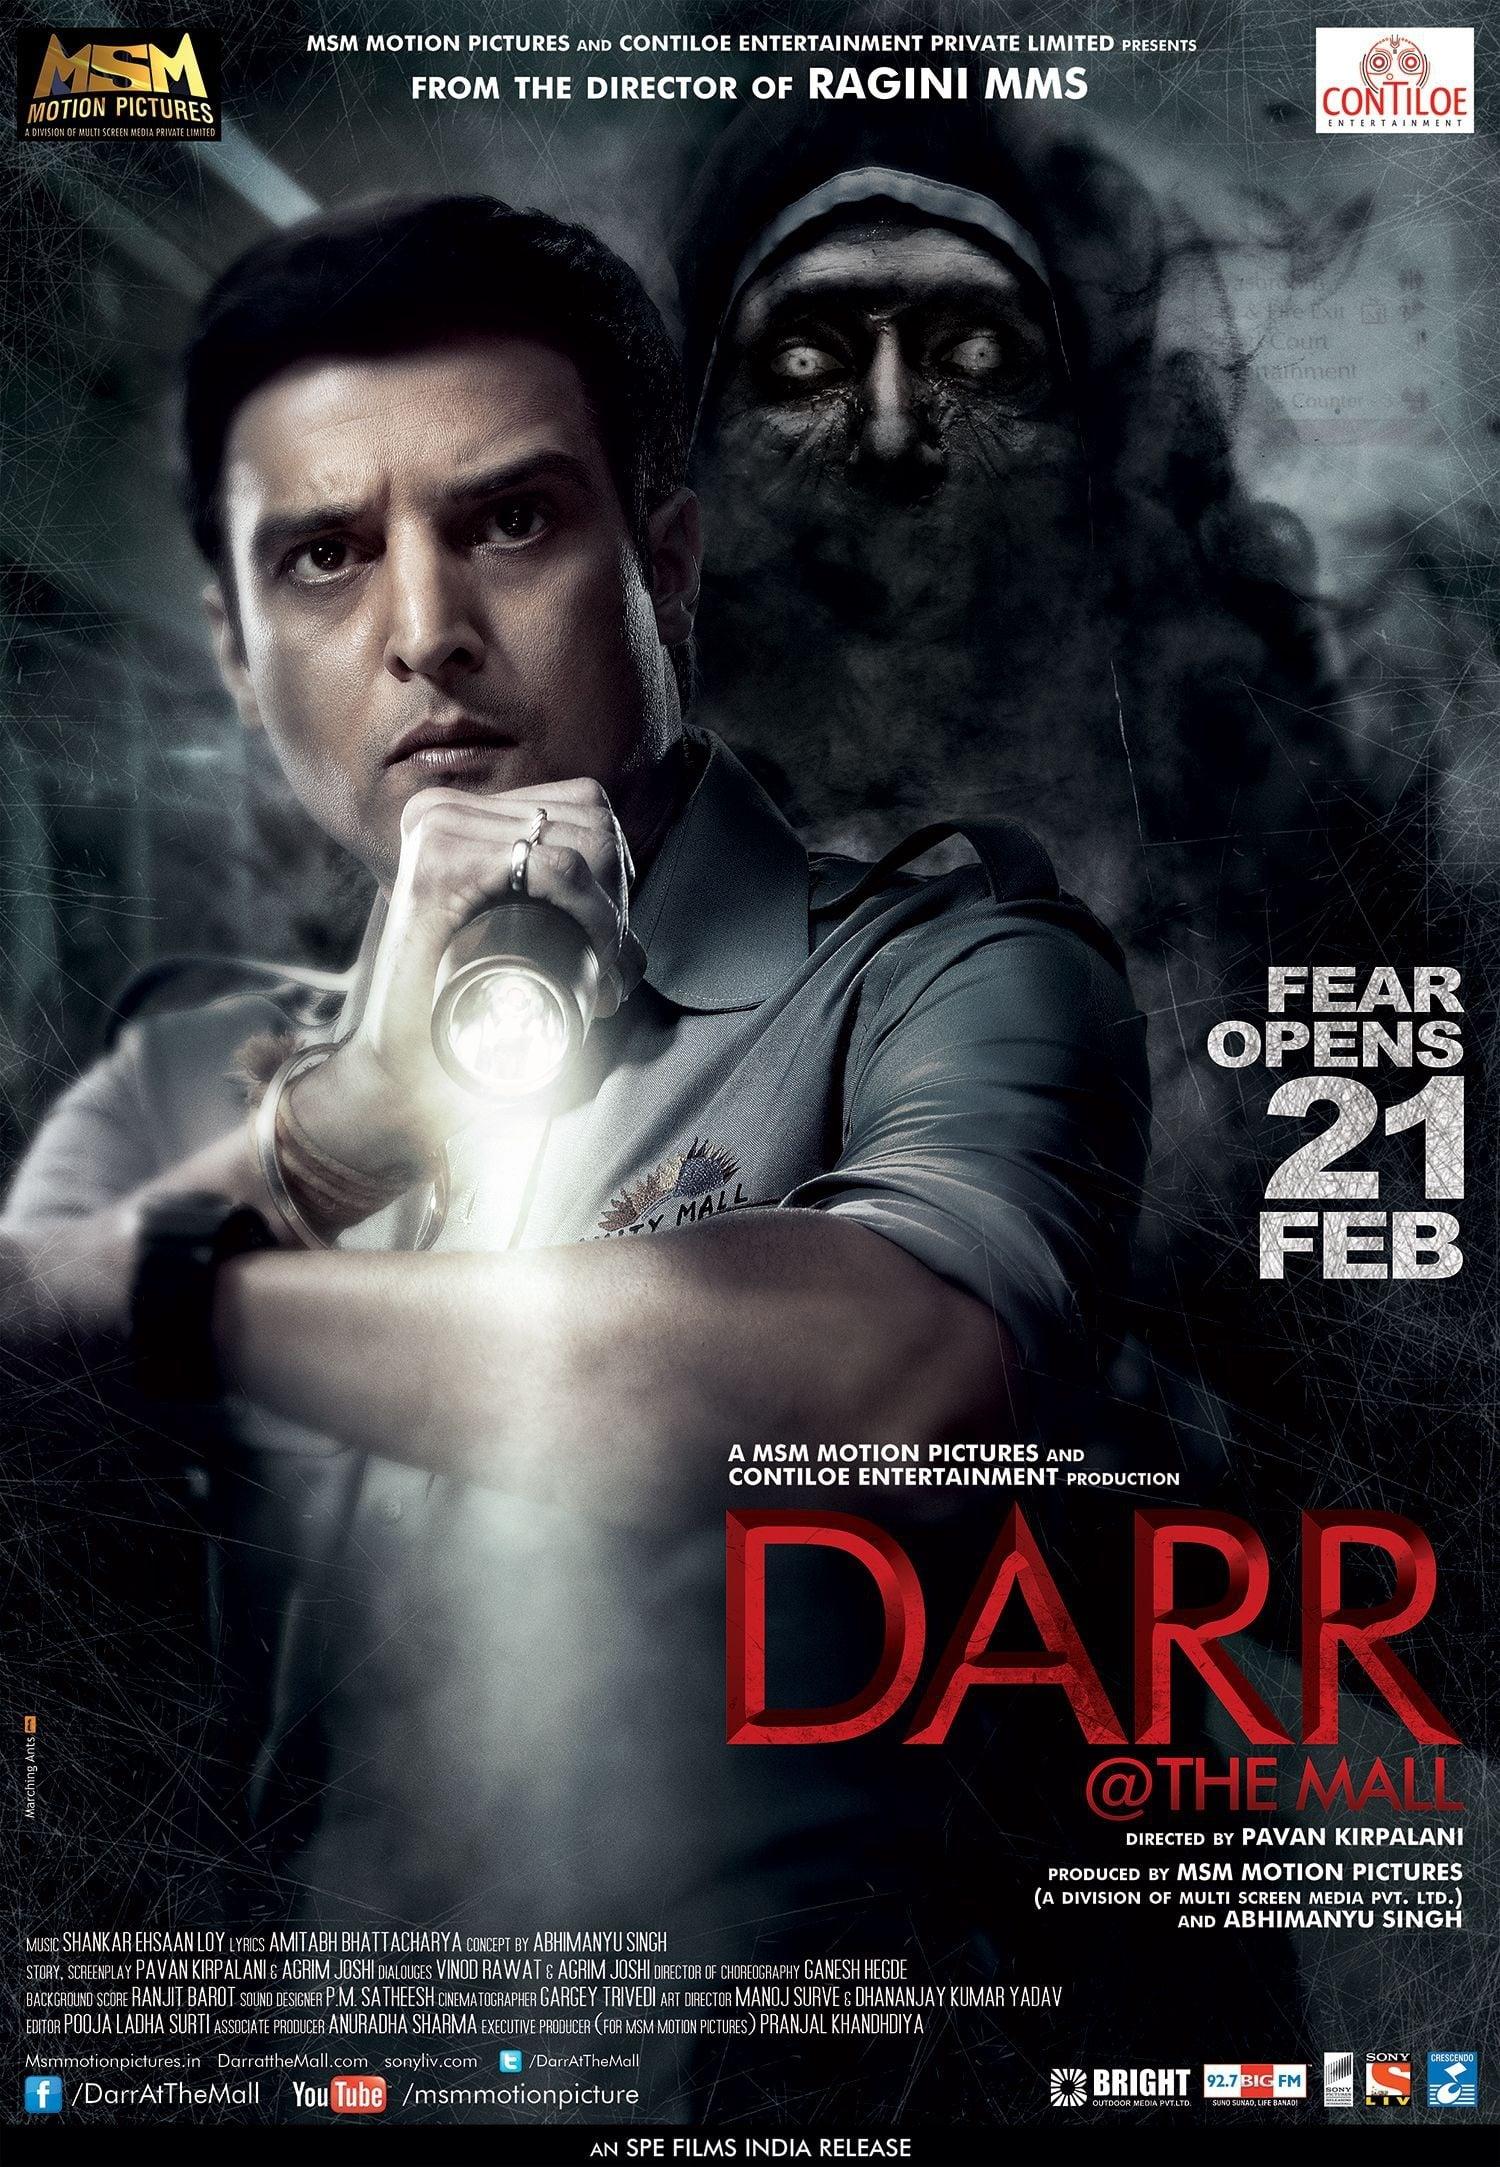 Darr @ the Mall poster